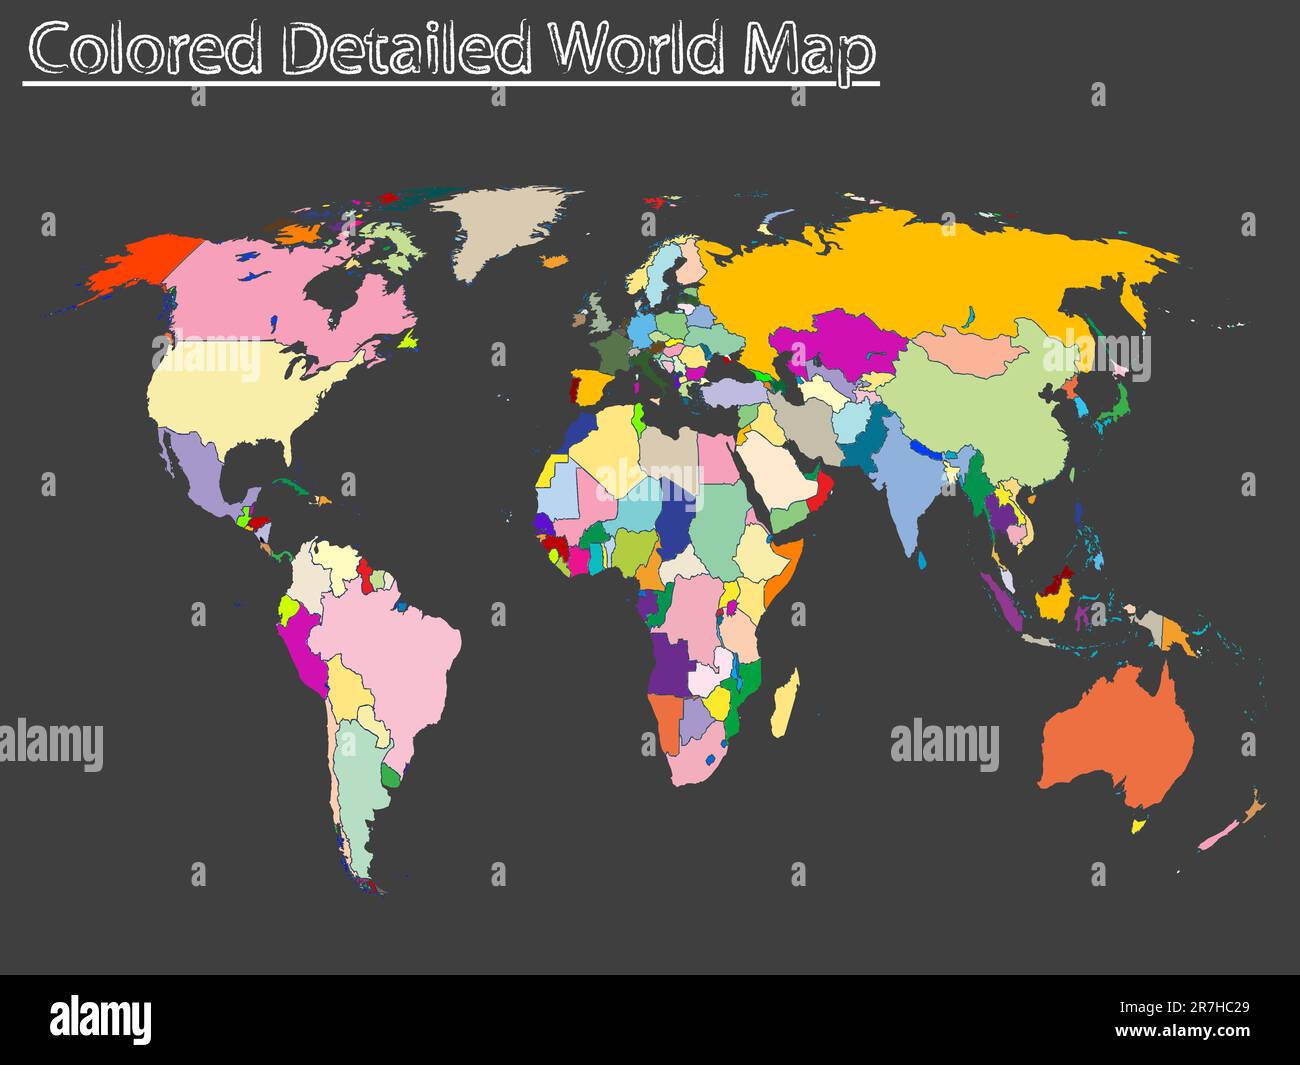 colored detailed world map, abstract vector art illustration Stock Vector